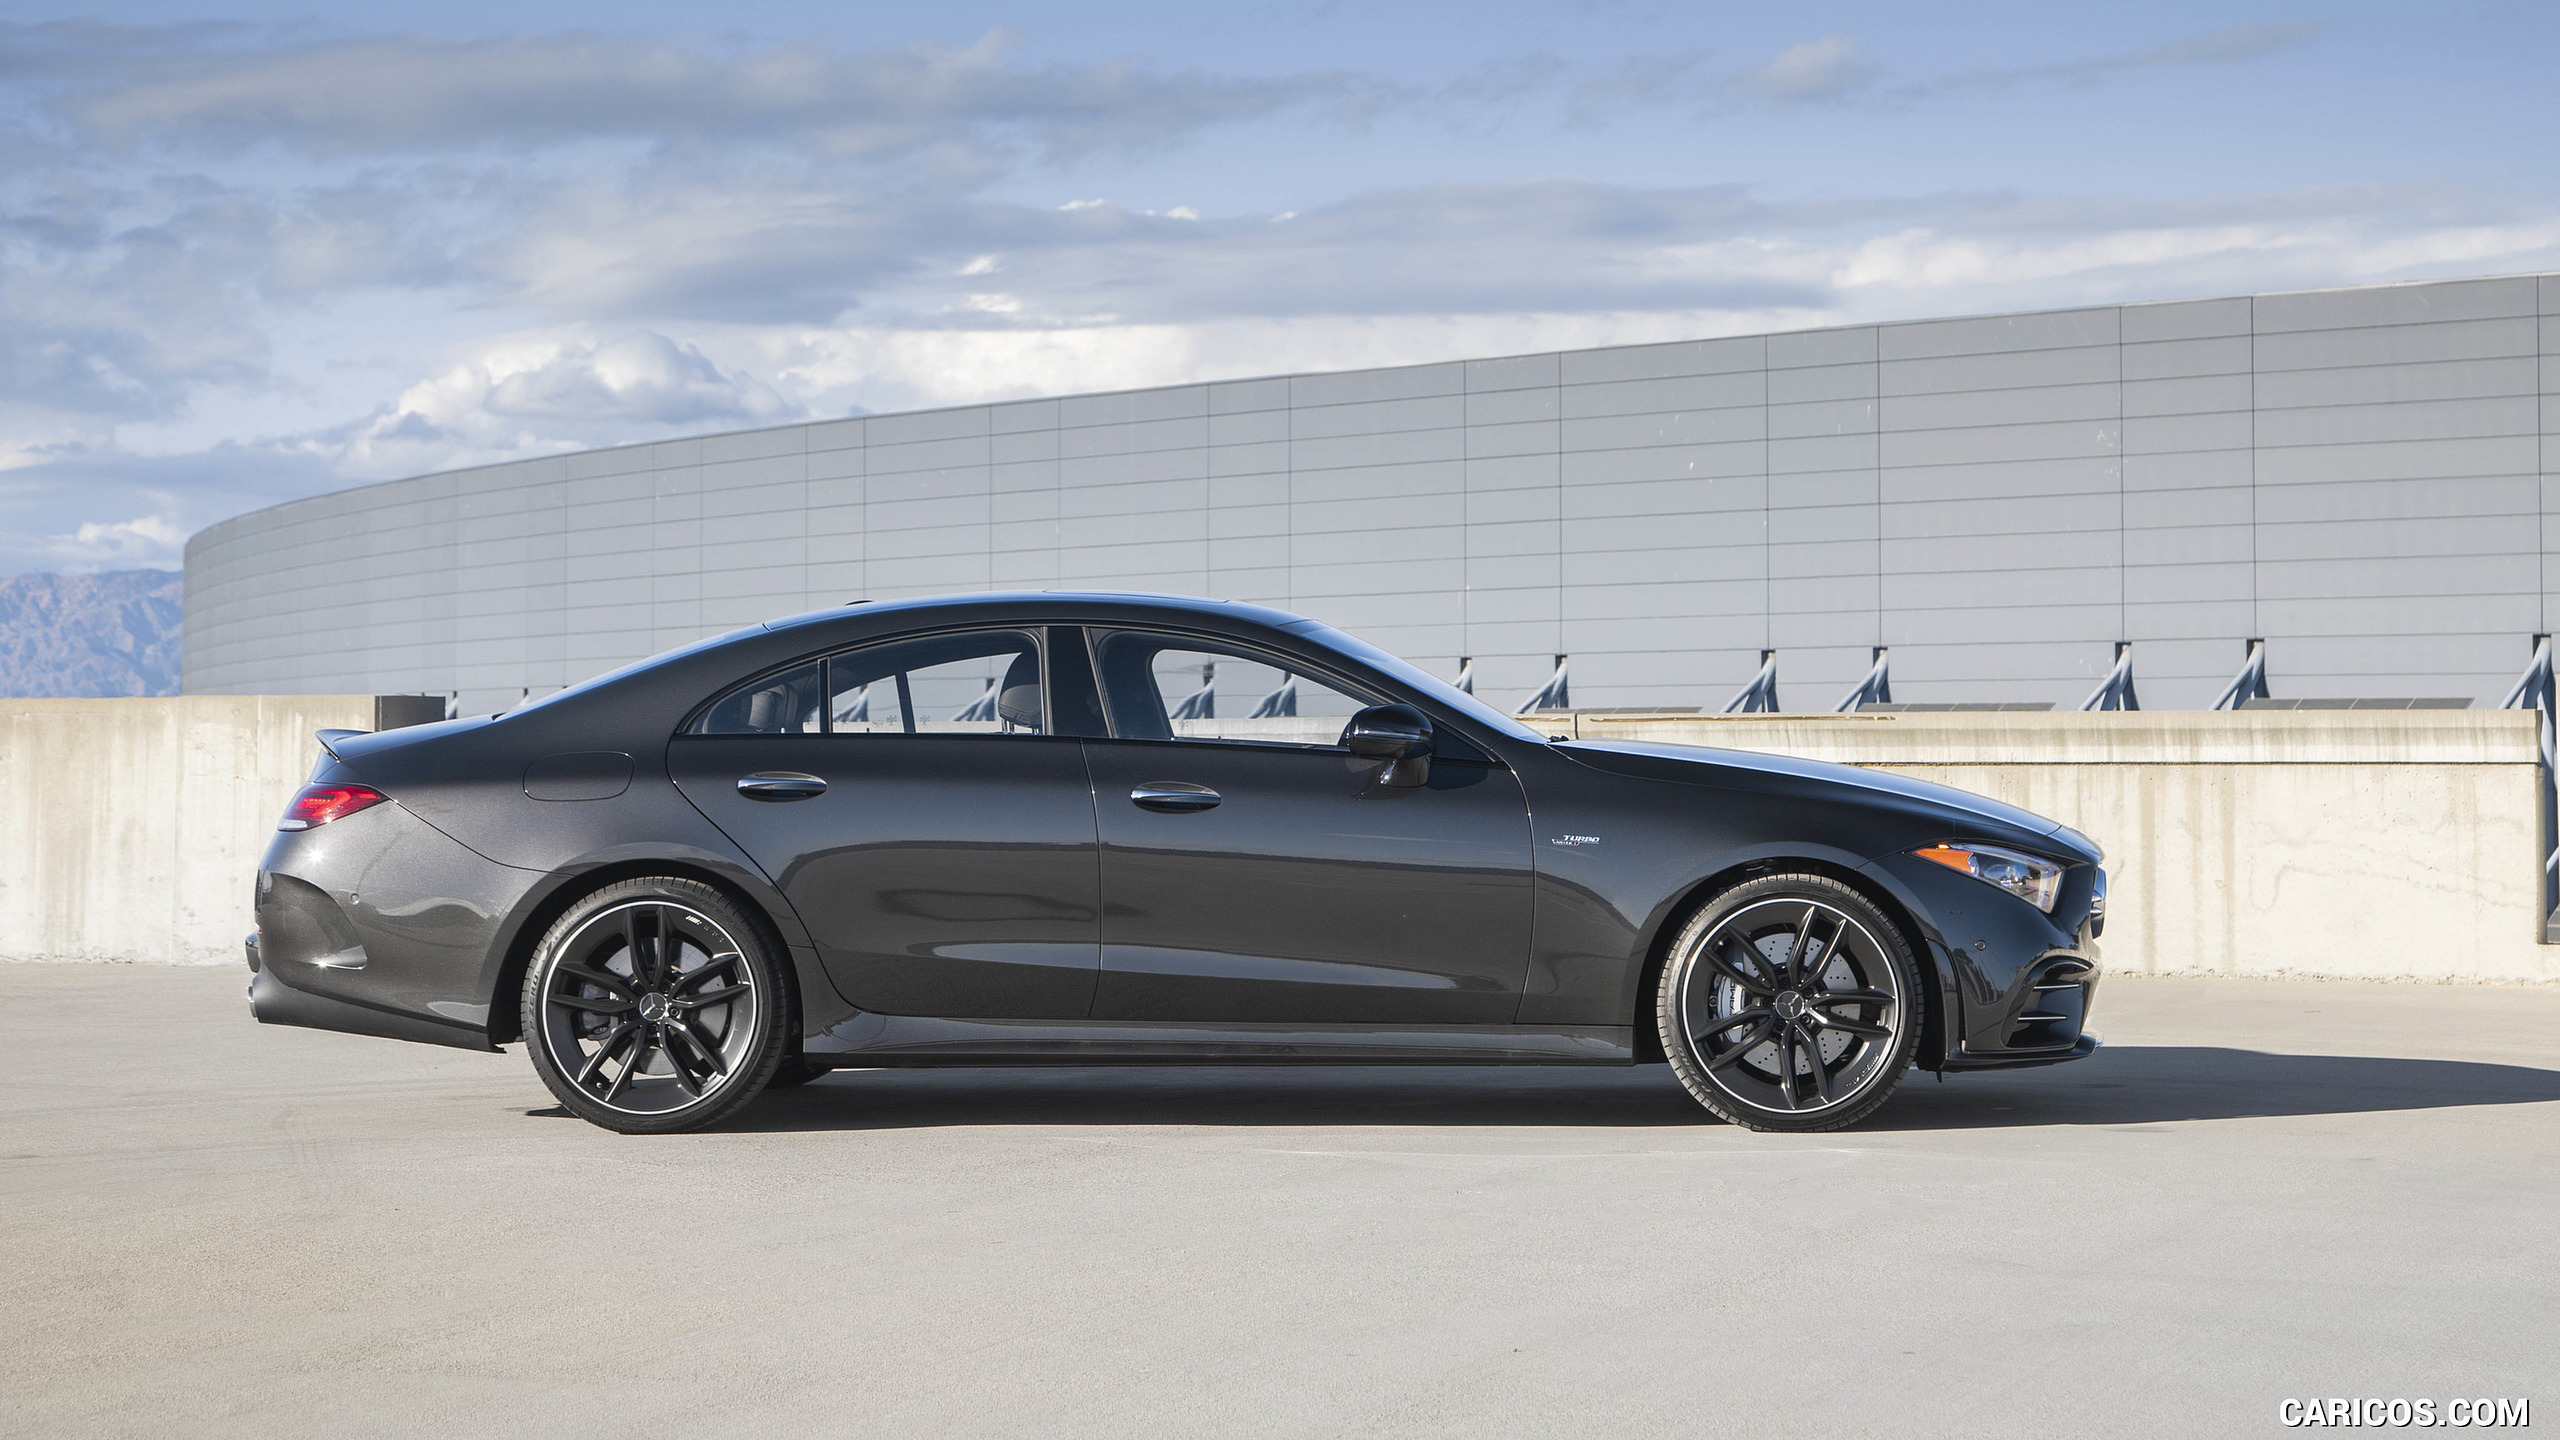 2019 Mercedes-AMG CLS 53 4MATIC+ (US-Spec) - Side, #41 of 84